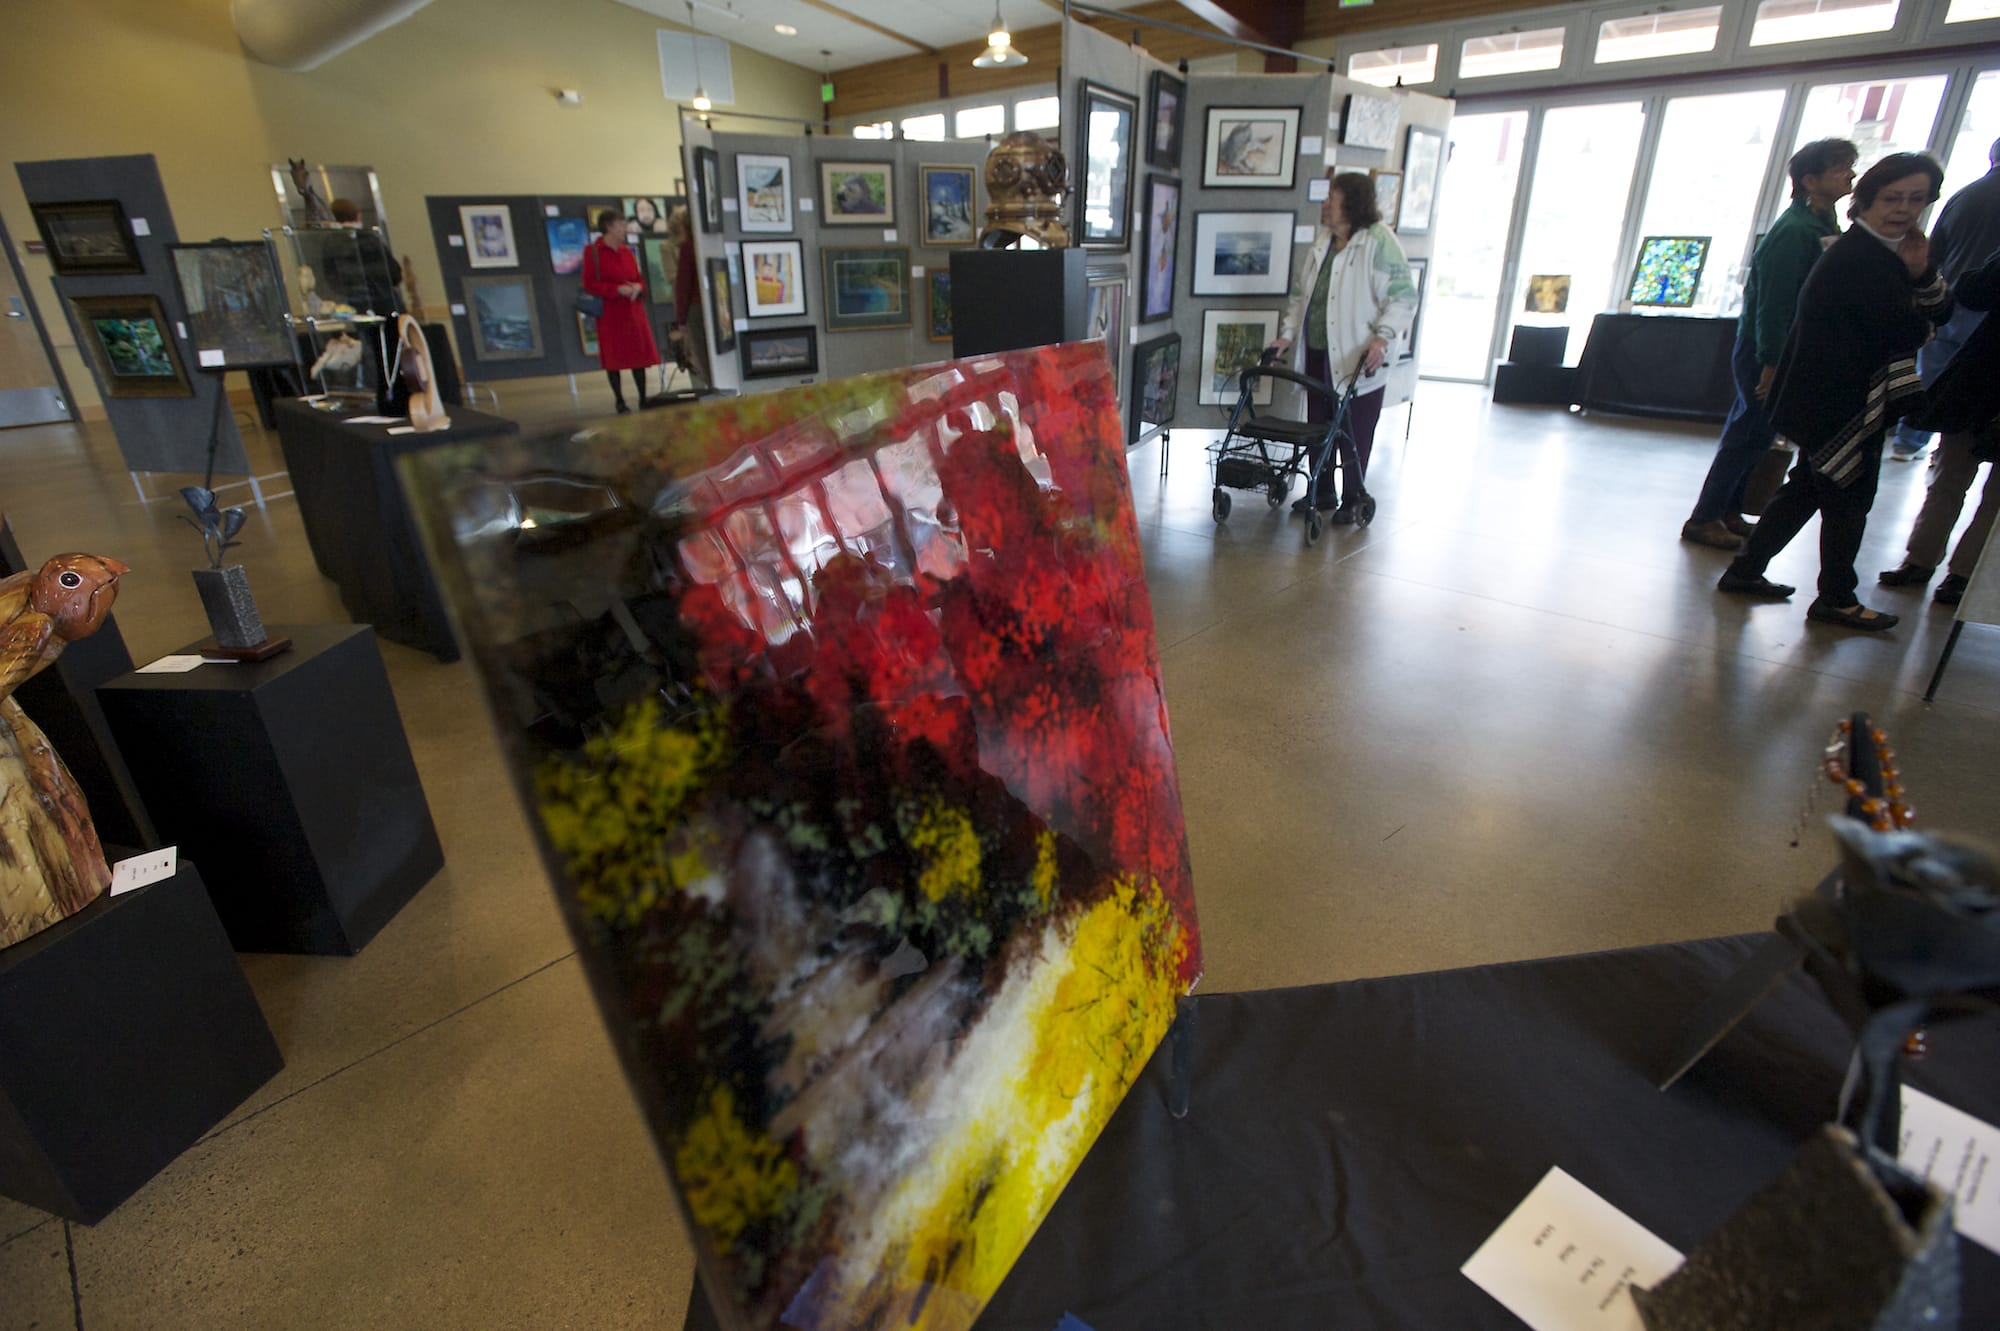 &quot;Red Waterfall,&quot; made from fused glass, by artist Ann Cavanaugh stands in the foreground as visitors enjoy the Battle Ground Art Alliance 12th annual Spring Show and Sale last year at the Battle Ground Community Center.